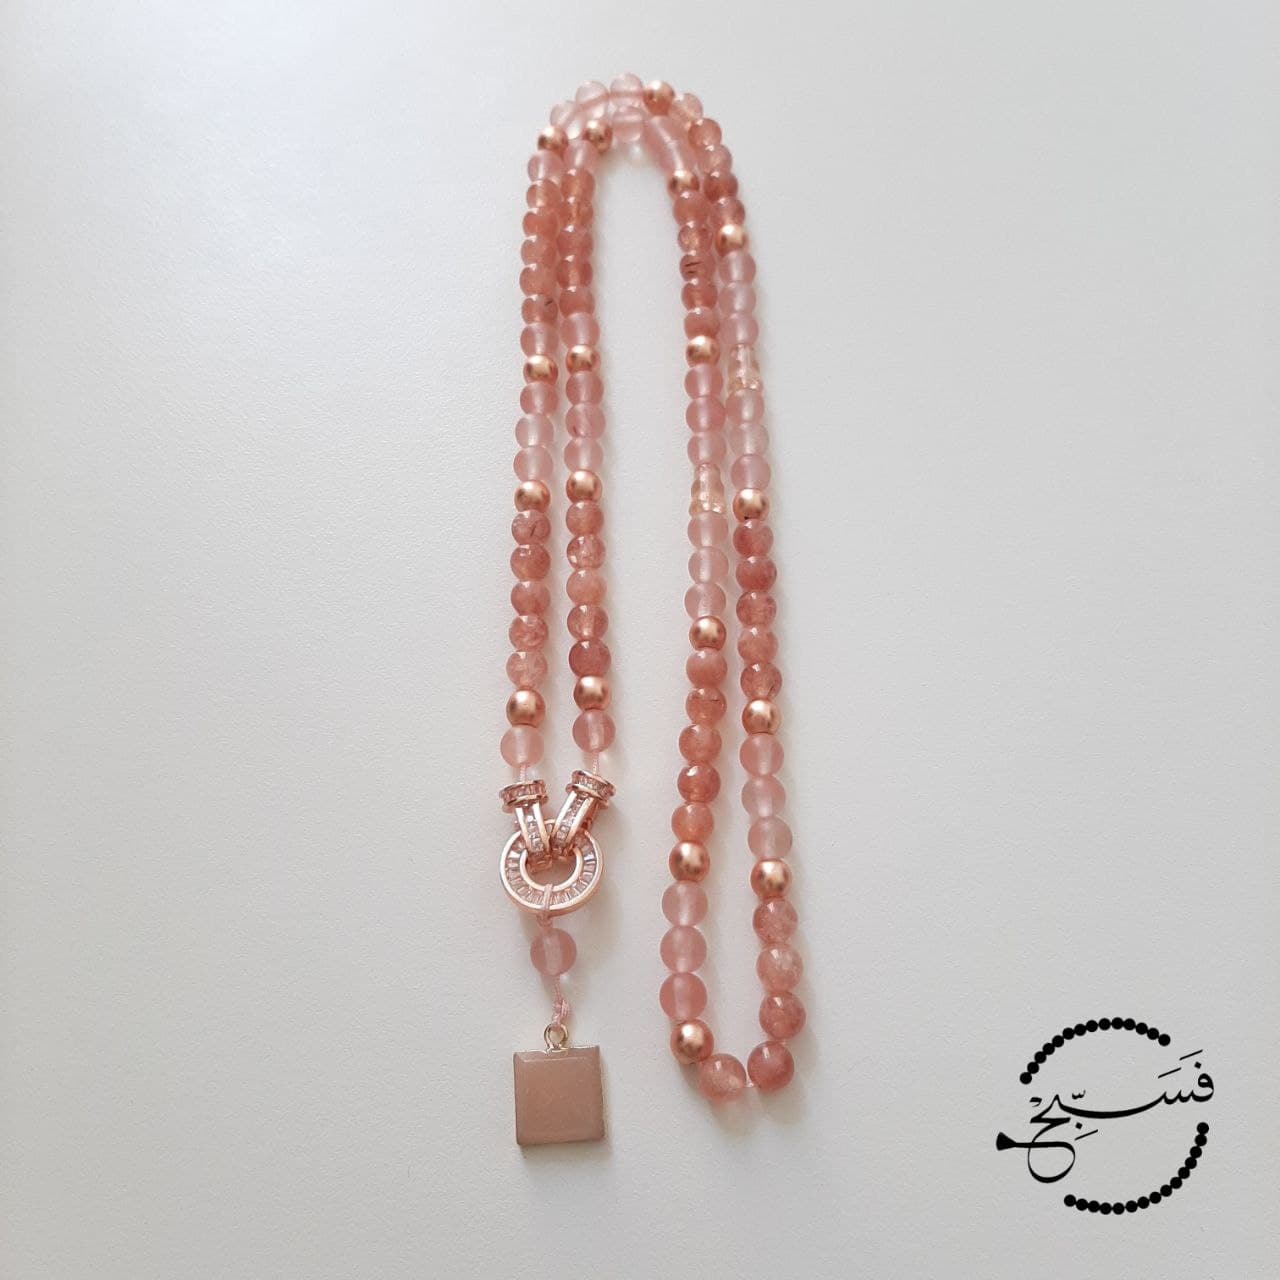 Natural watermelon quartz and sunstone beads have a lovely peachy pink colour, which look beautiful with rose gold. This 99 bead tasbih has a stunning clasp, so it can be easily opened and worn as a necklace.